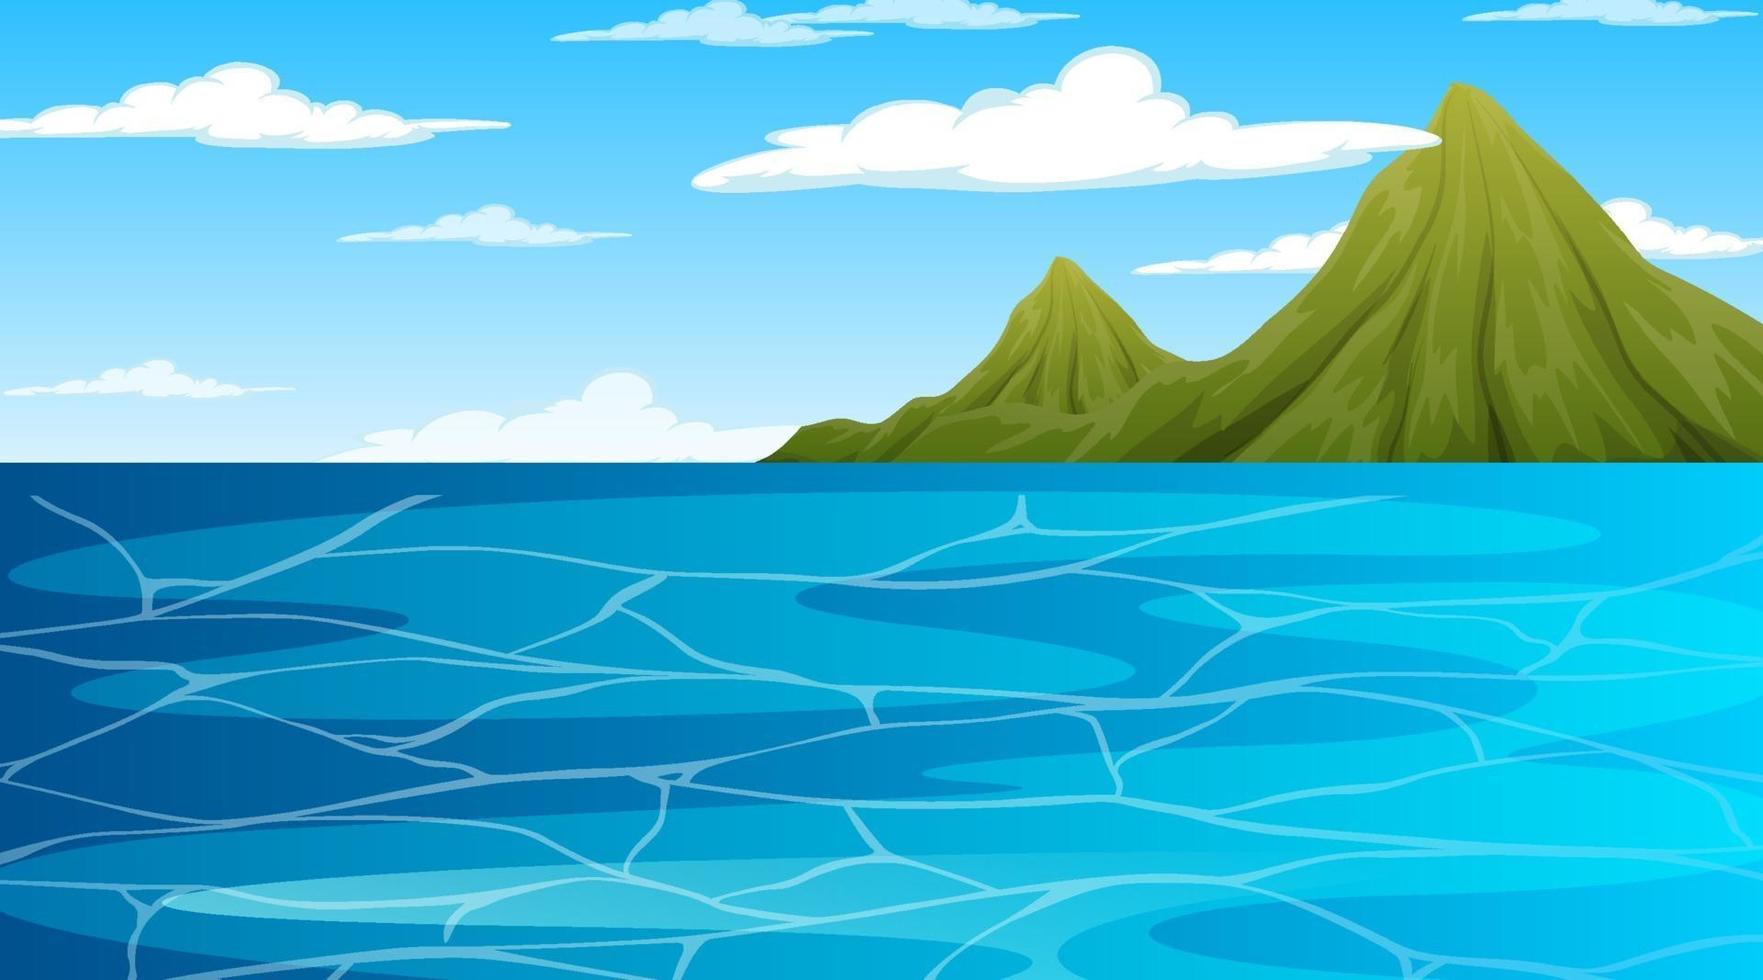 Ocean at daytime landscape scene with mountain background vector